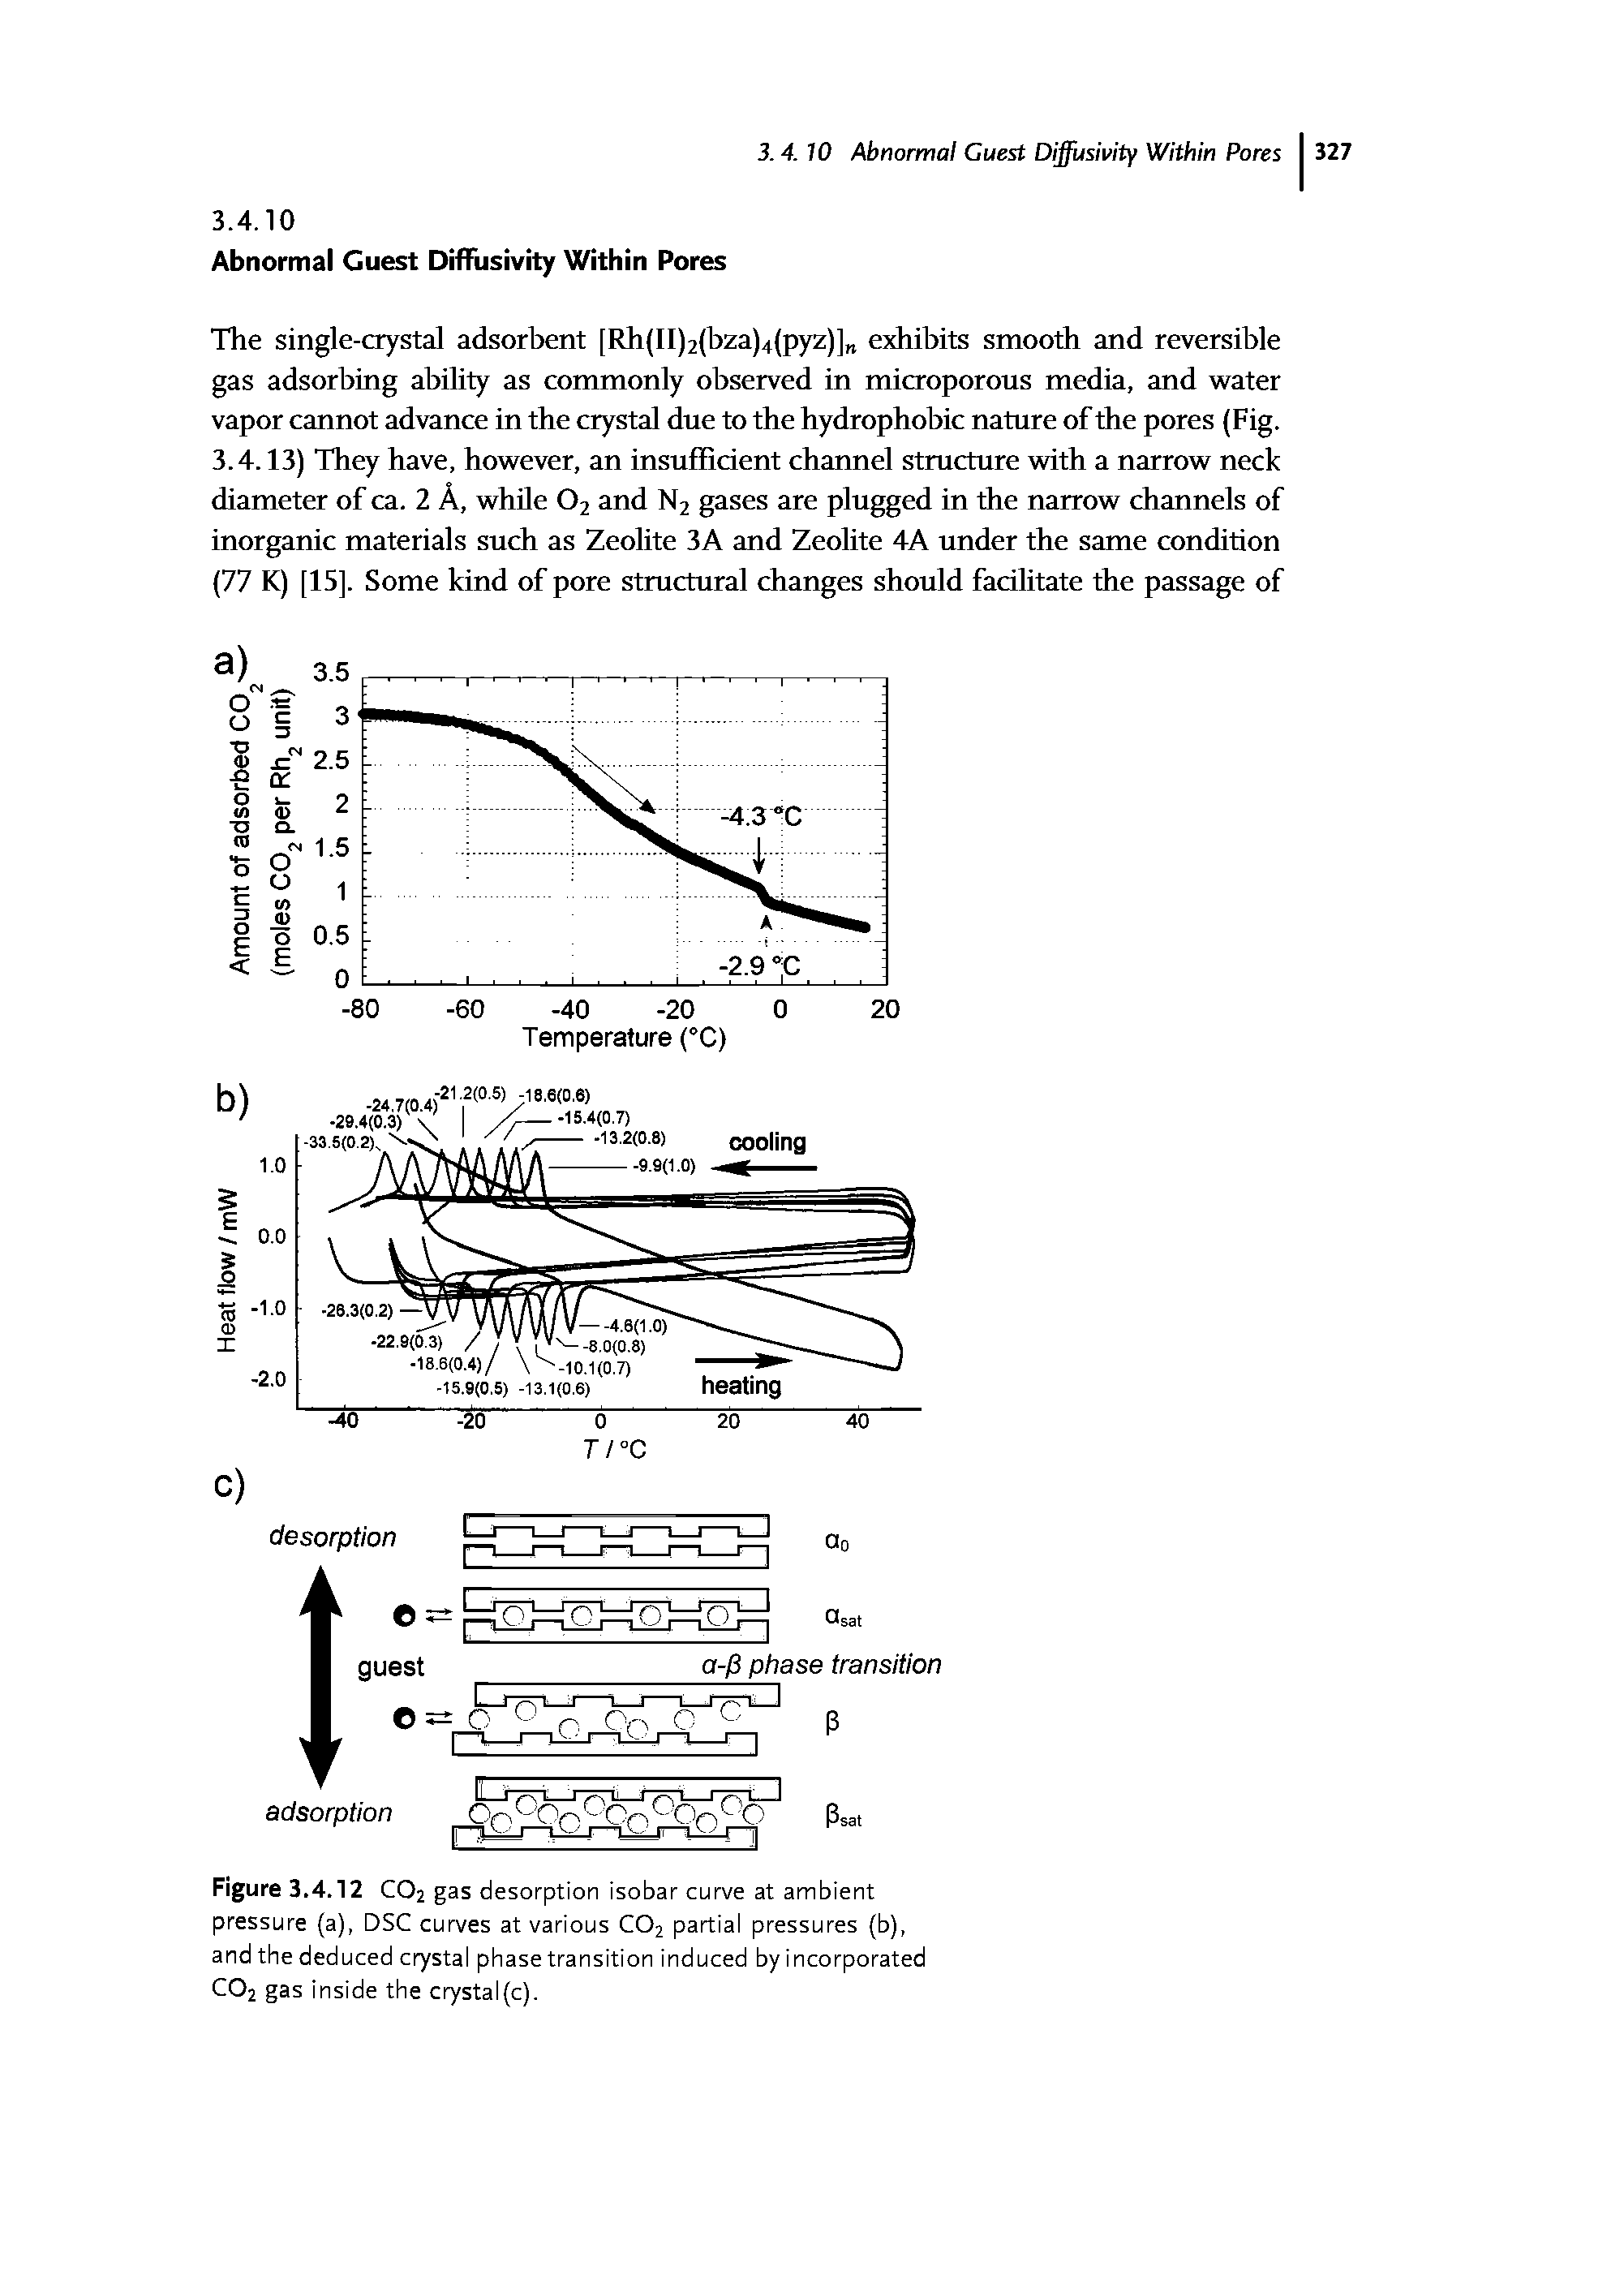 Figure 3.4.12 C02 gas desorption isobar curve at ambient pressure (a), DSC curves at various C02 partial pressures (b), and the deduced crystal phase transition induced by incorporated C02 gas inside the crystal(c).